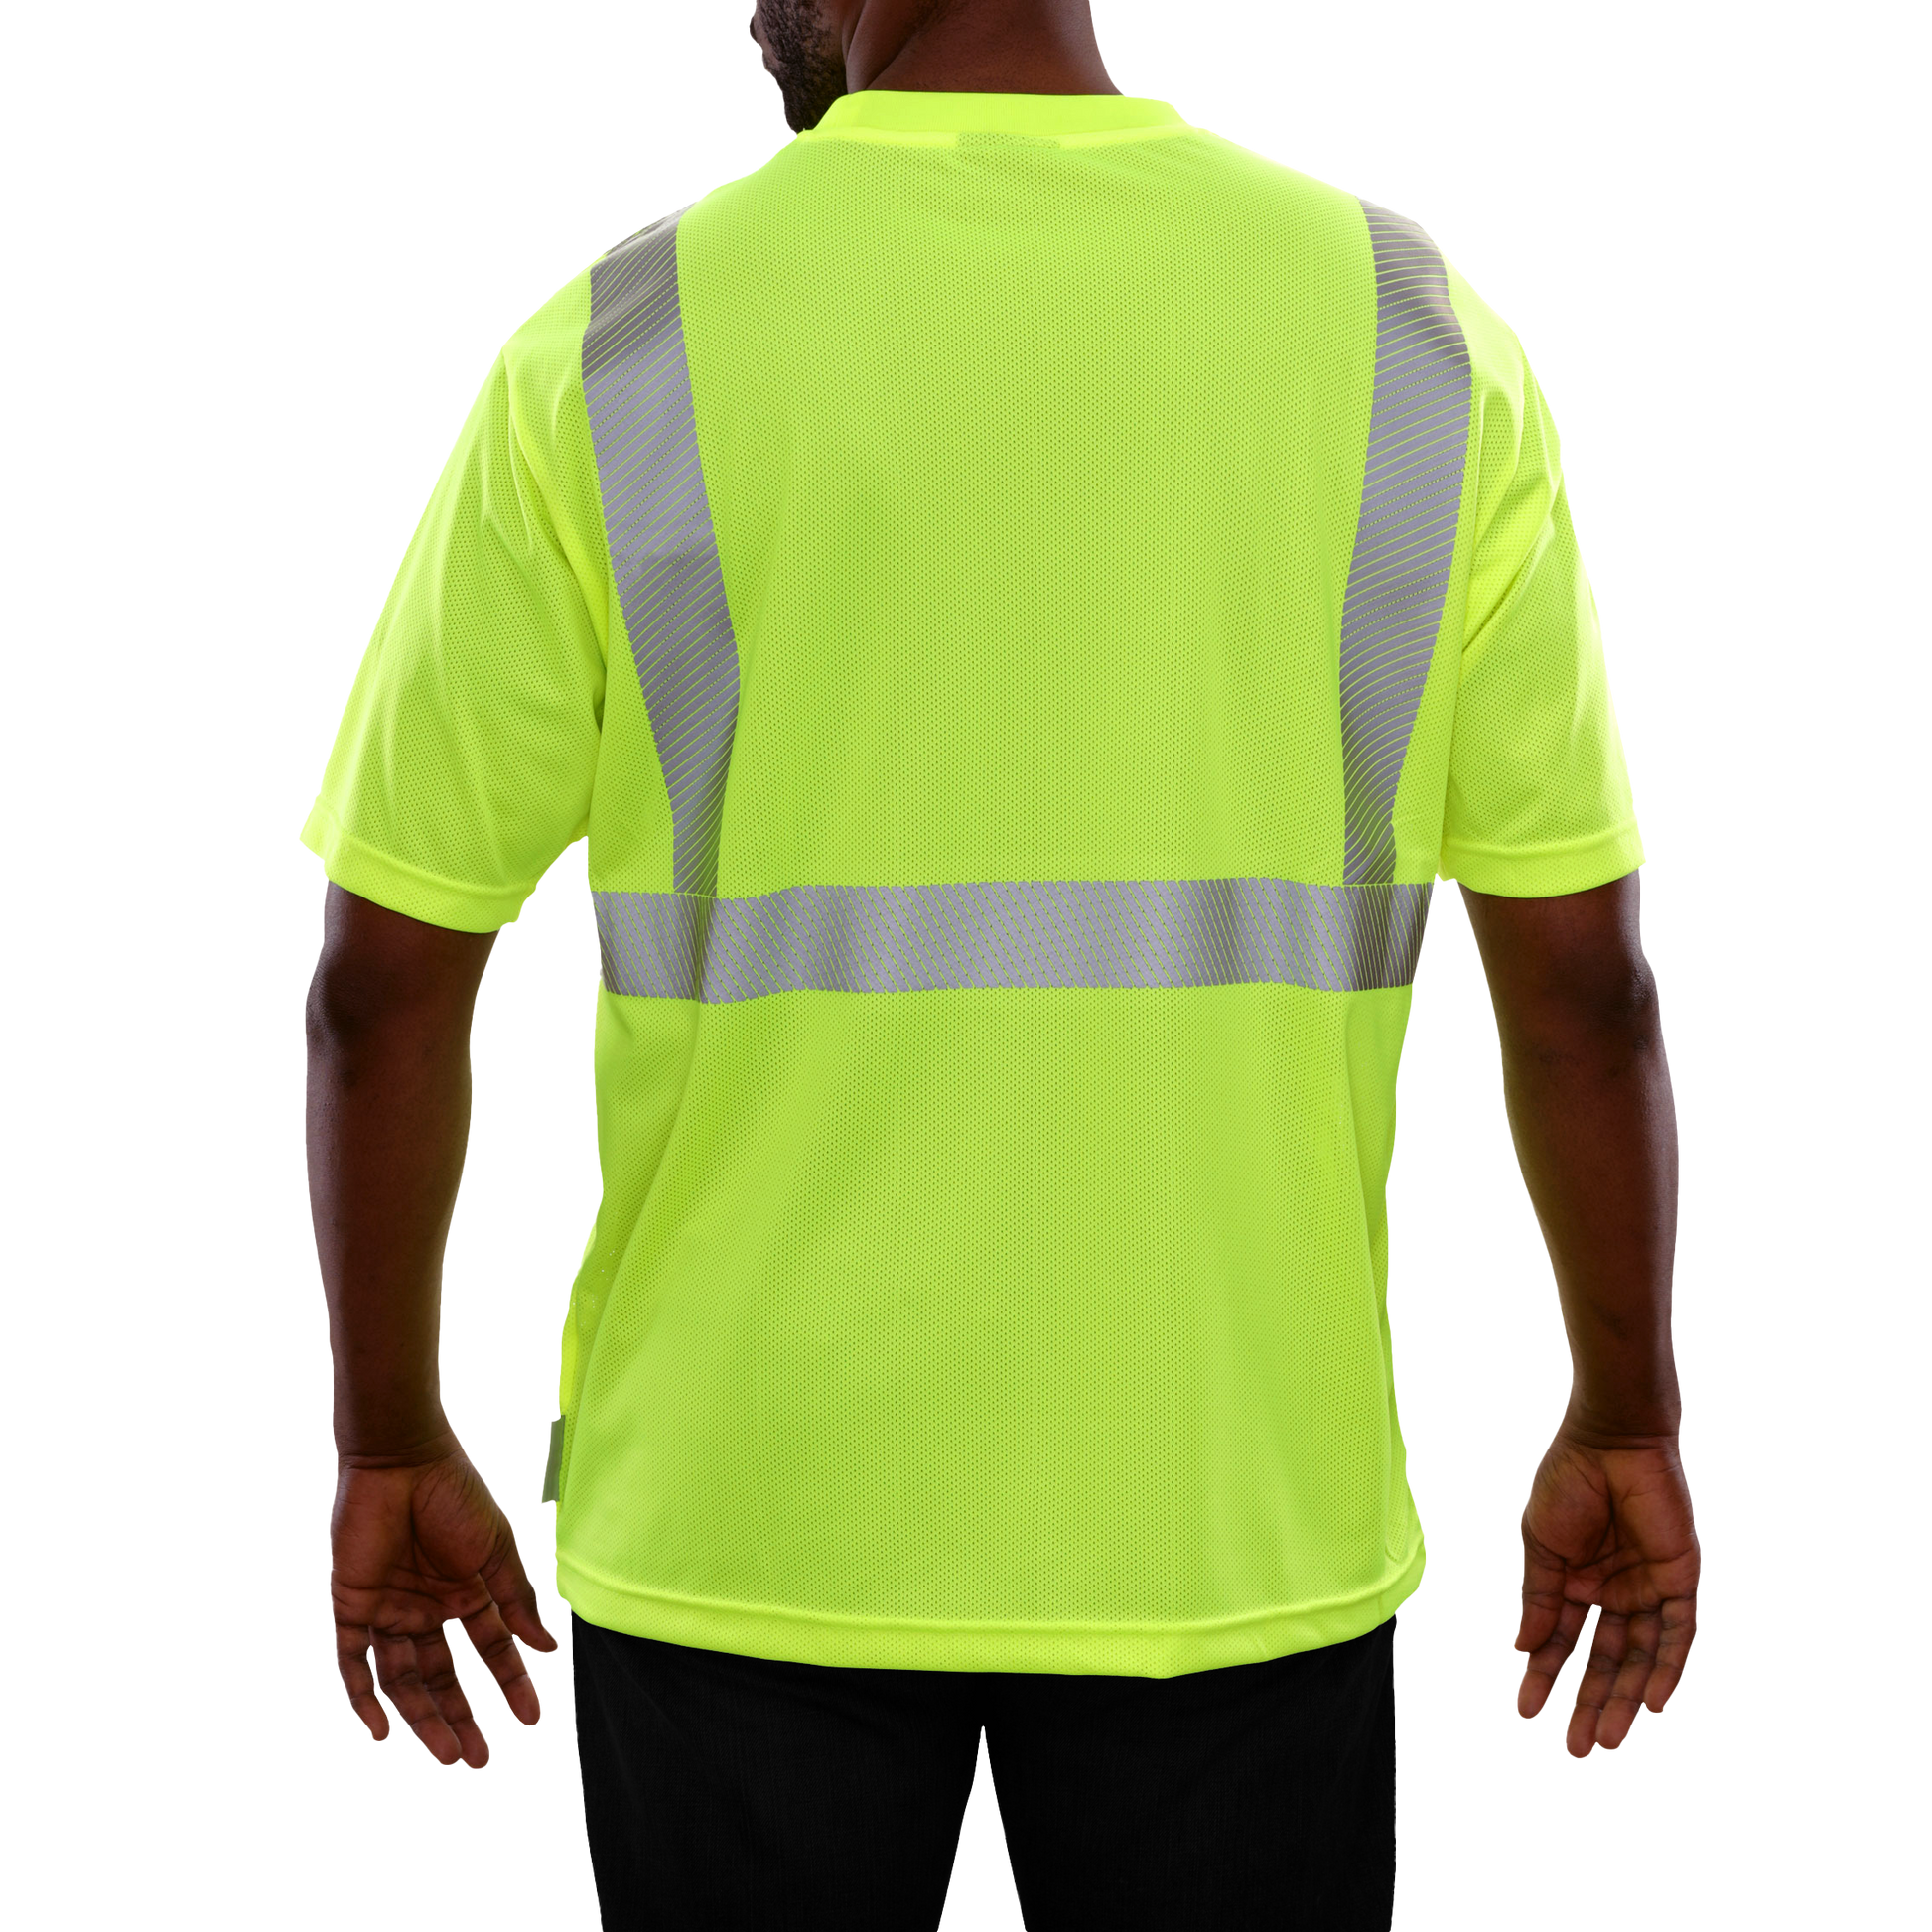 Micro Mesh Scrimmage Vests (With Options)